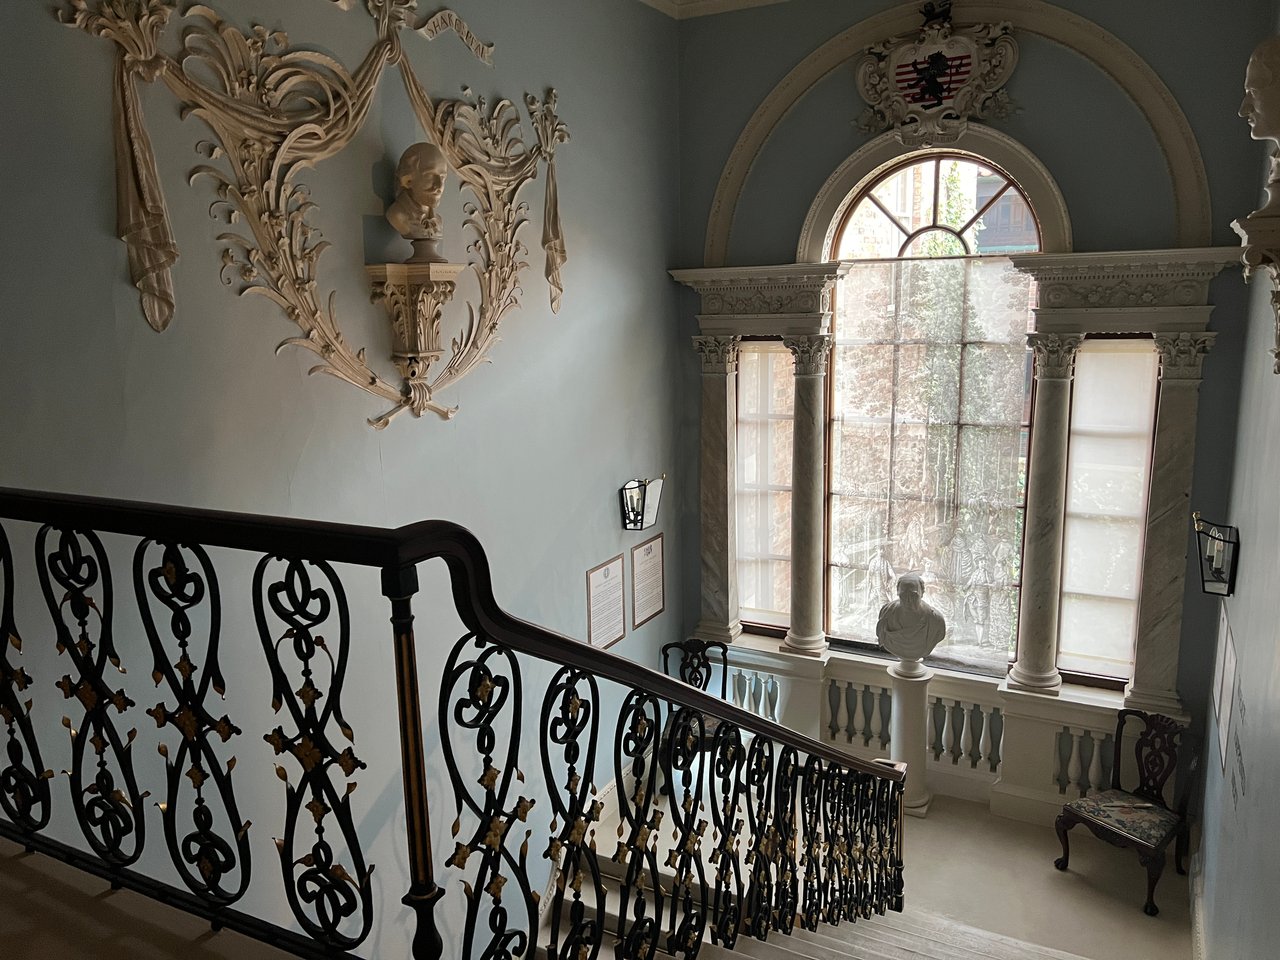 A photo of the grand staircase at Fairfax House